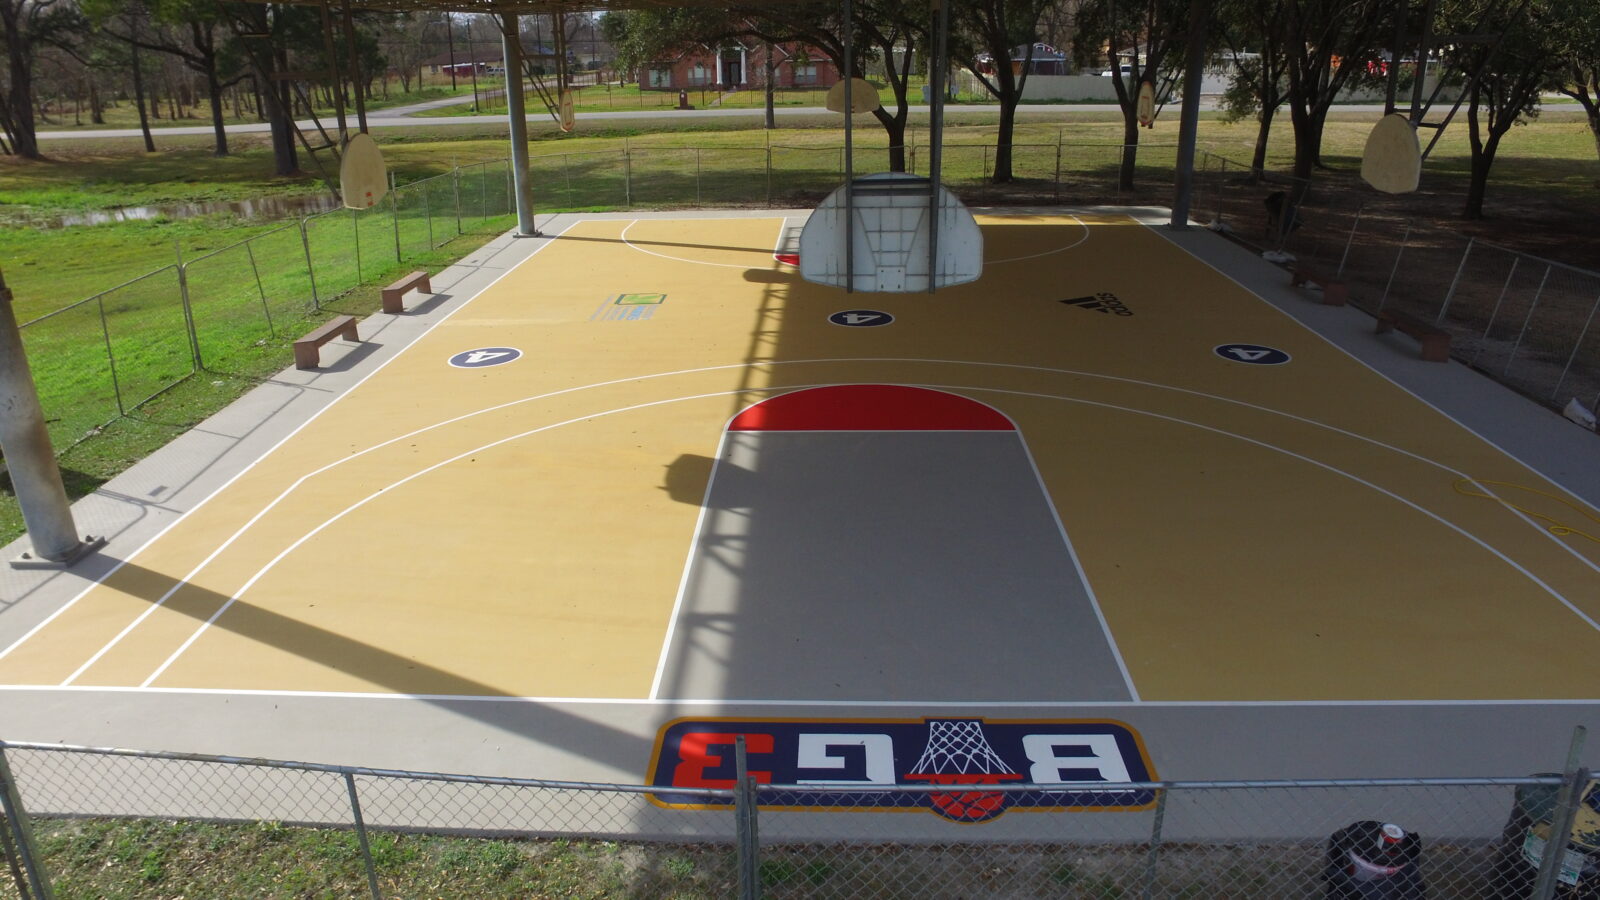 NYC's 5 Best Public Basketball Courts - CBS New York